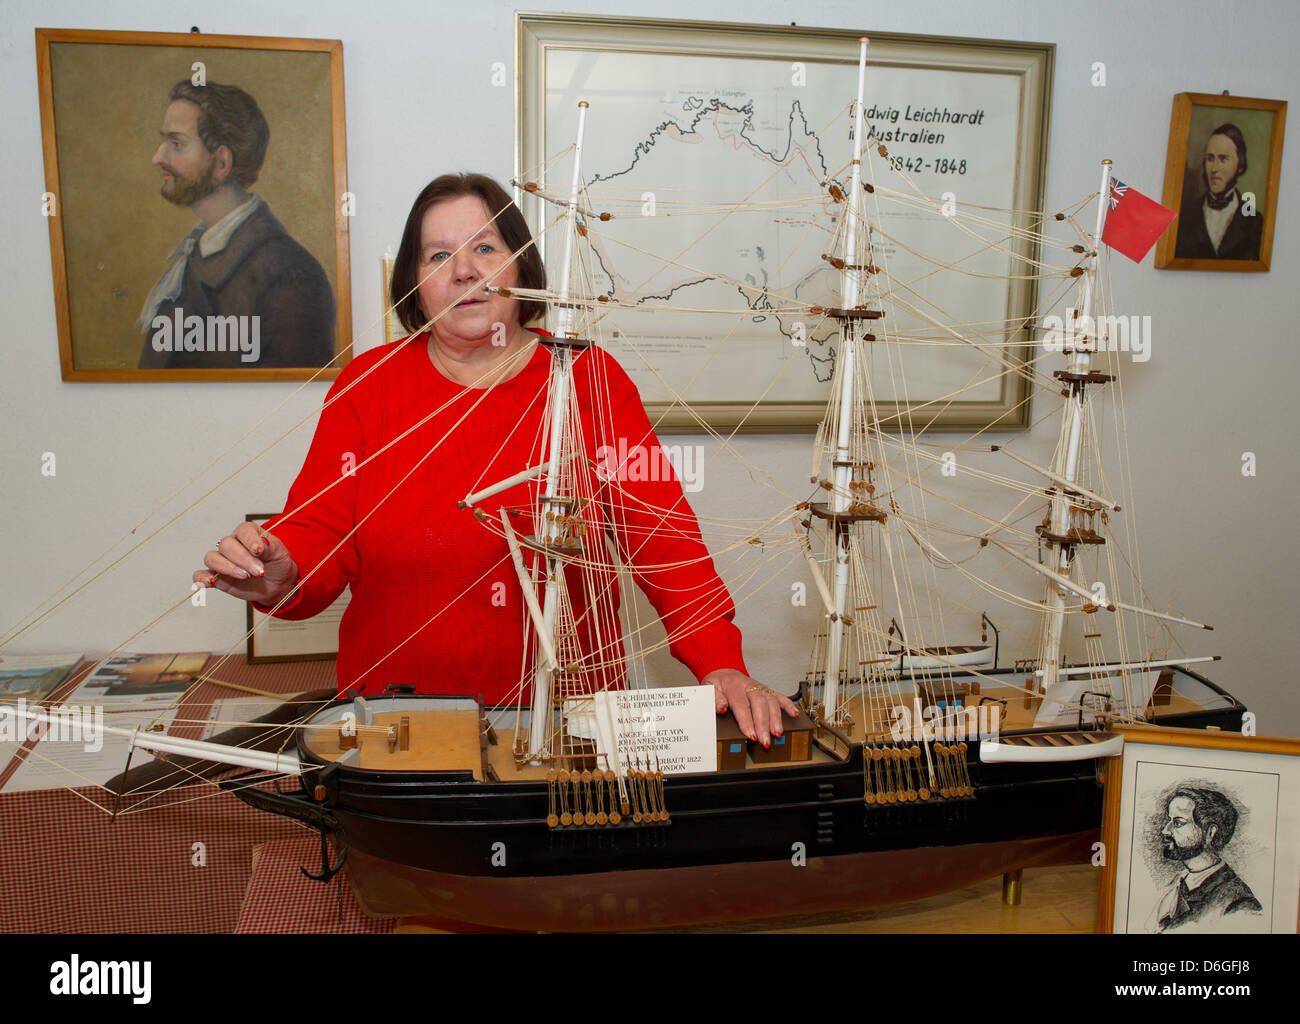 Museum employee Sabine Miething stands behind a model of the ship that researcher Leichhardt traveled to Australia with in 1841 in the Ludwig-Leichhardt-Museum in Trebatsch, Germany, 16 February 2012. A exhibition to commemorate the 200th birthday of Ludwig Leichhardt, born in Trebatsch in 1813 and a pioneer in the Australian outback, will take place in 2013. The exhibition is mean Stock Photo